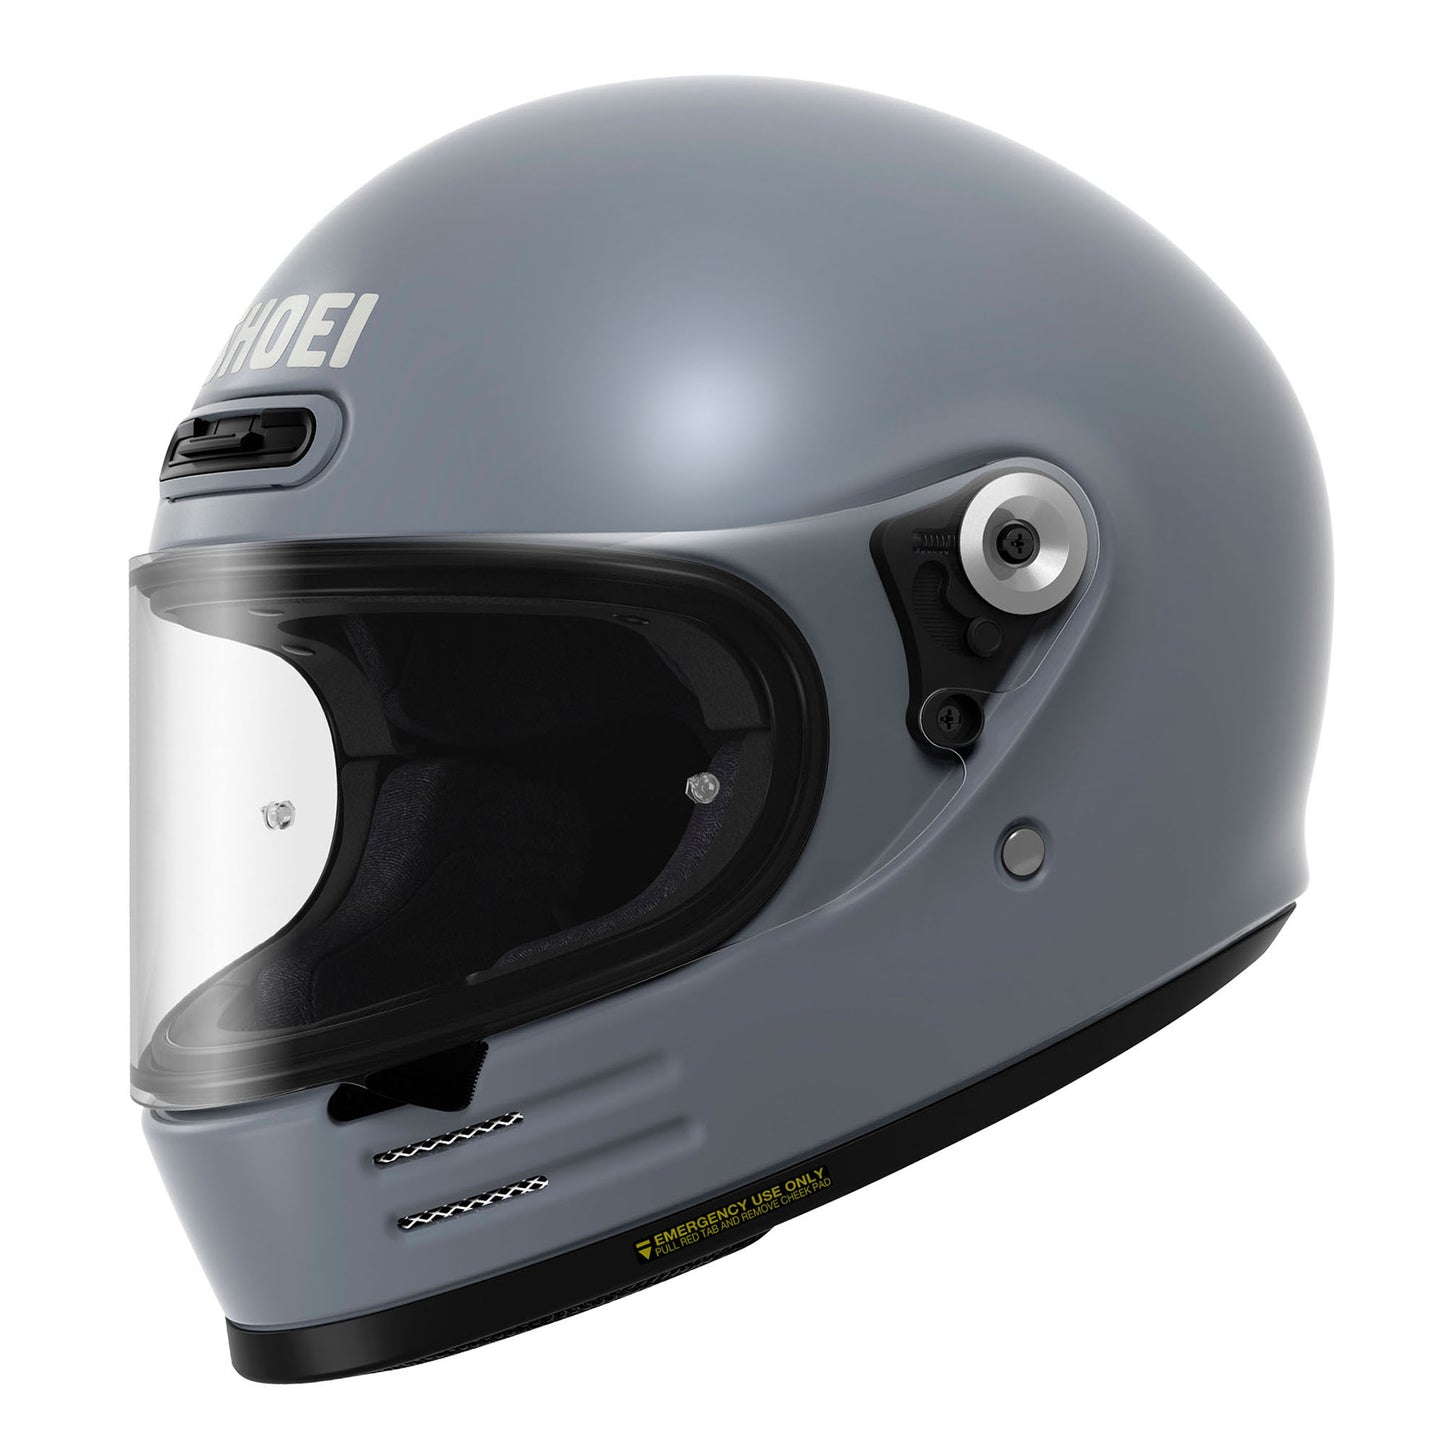 Capacete Shoei Glamster 06